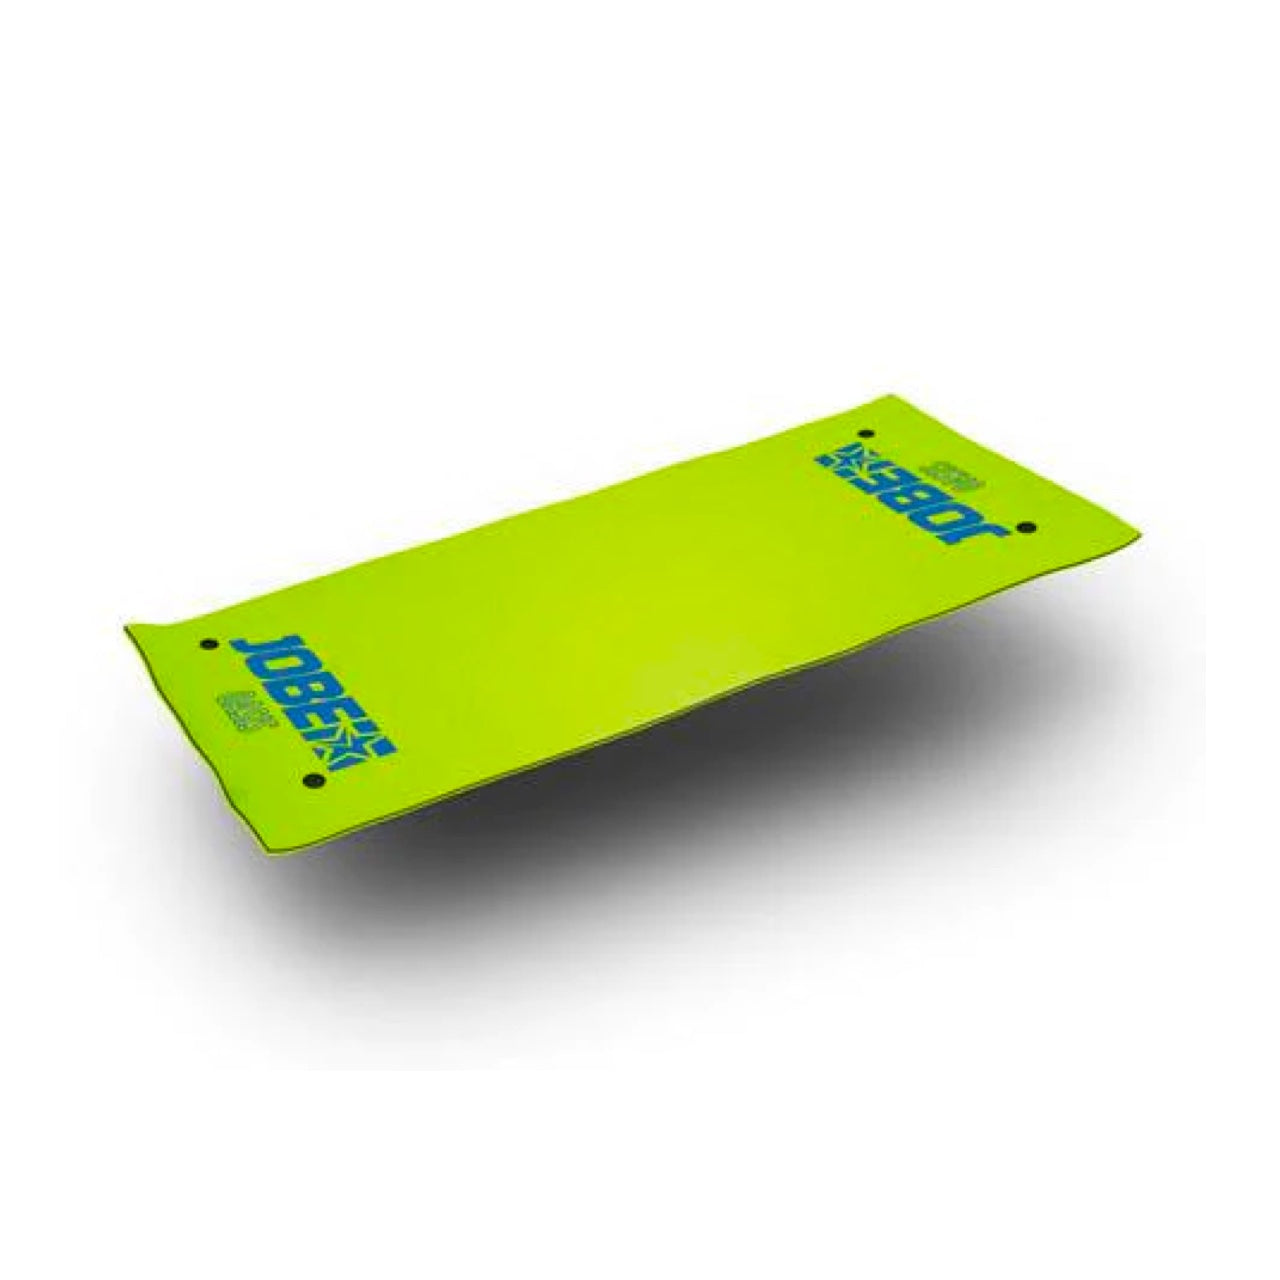 The lime green Jobe Oasis Floating Water Mat with blue JOBE logo.